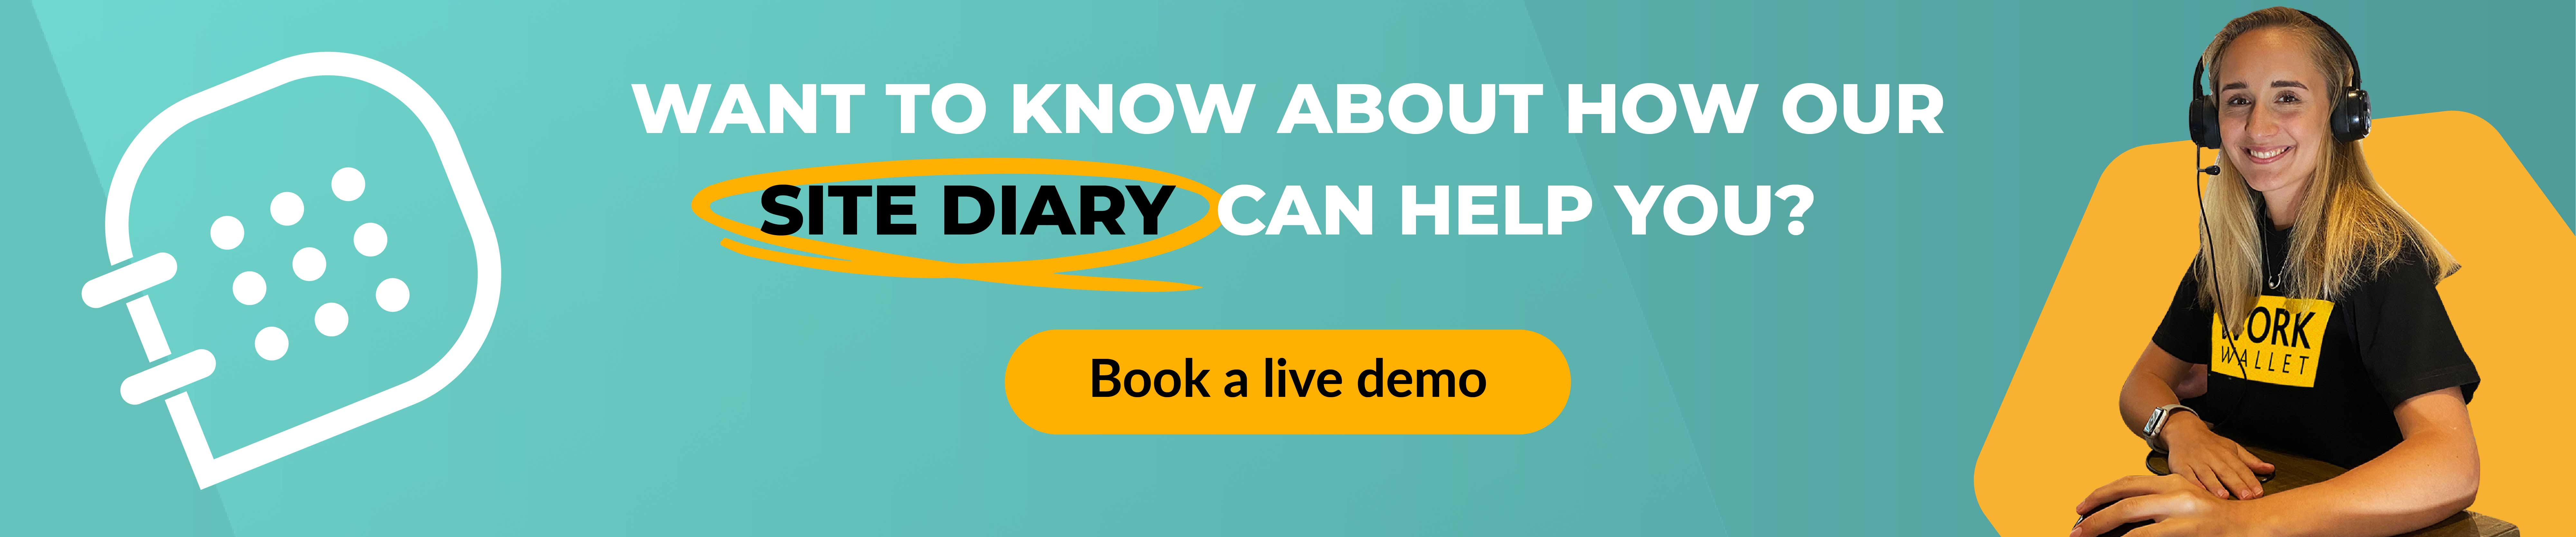 site diary demo link banner